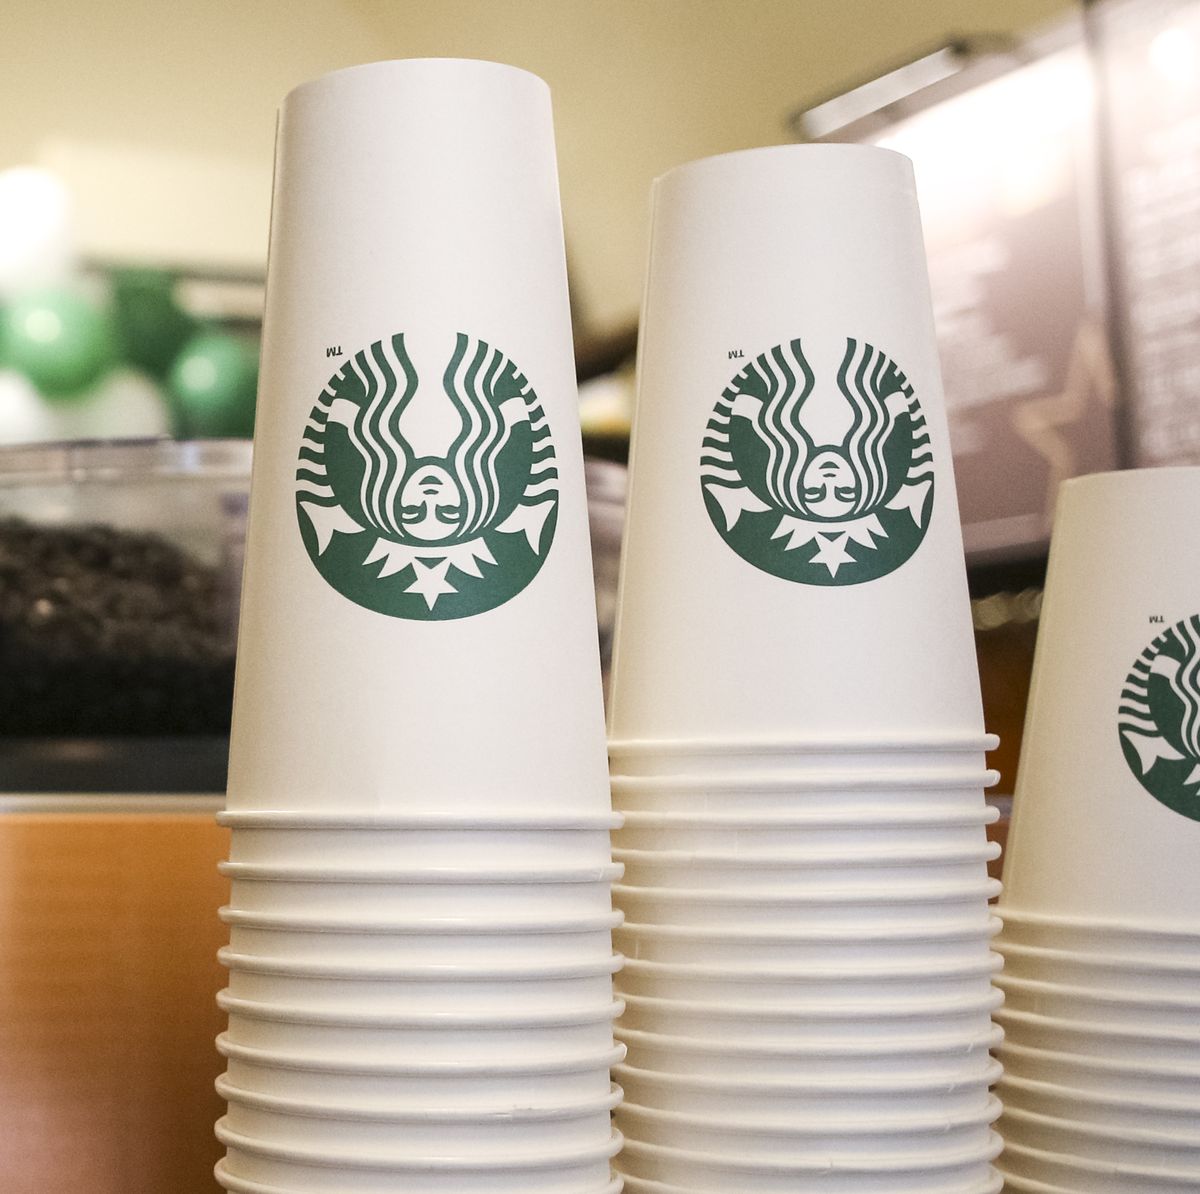 What Are The Different Starbucks Cup Sizes? - DrinkStack